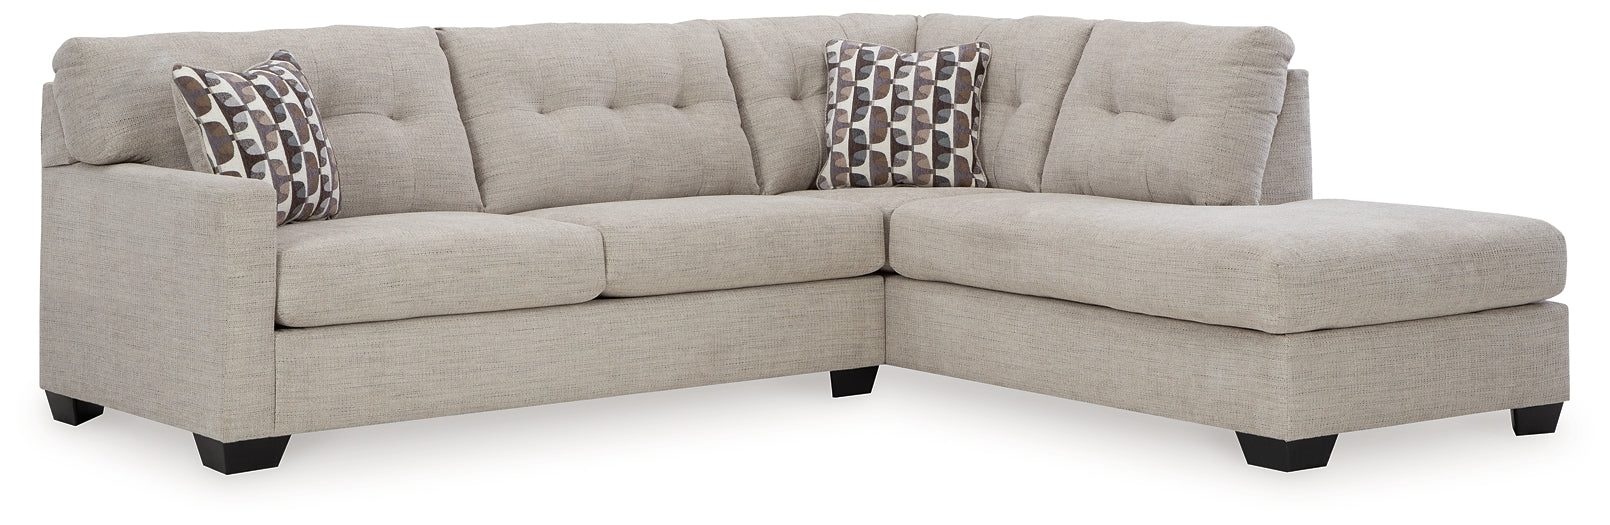 Mahoney 2-Piece Sectional with Chaise JB's Furniture  Home Furniture, Home Decor, Furniture Store